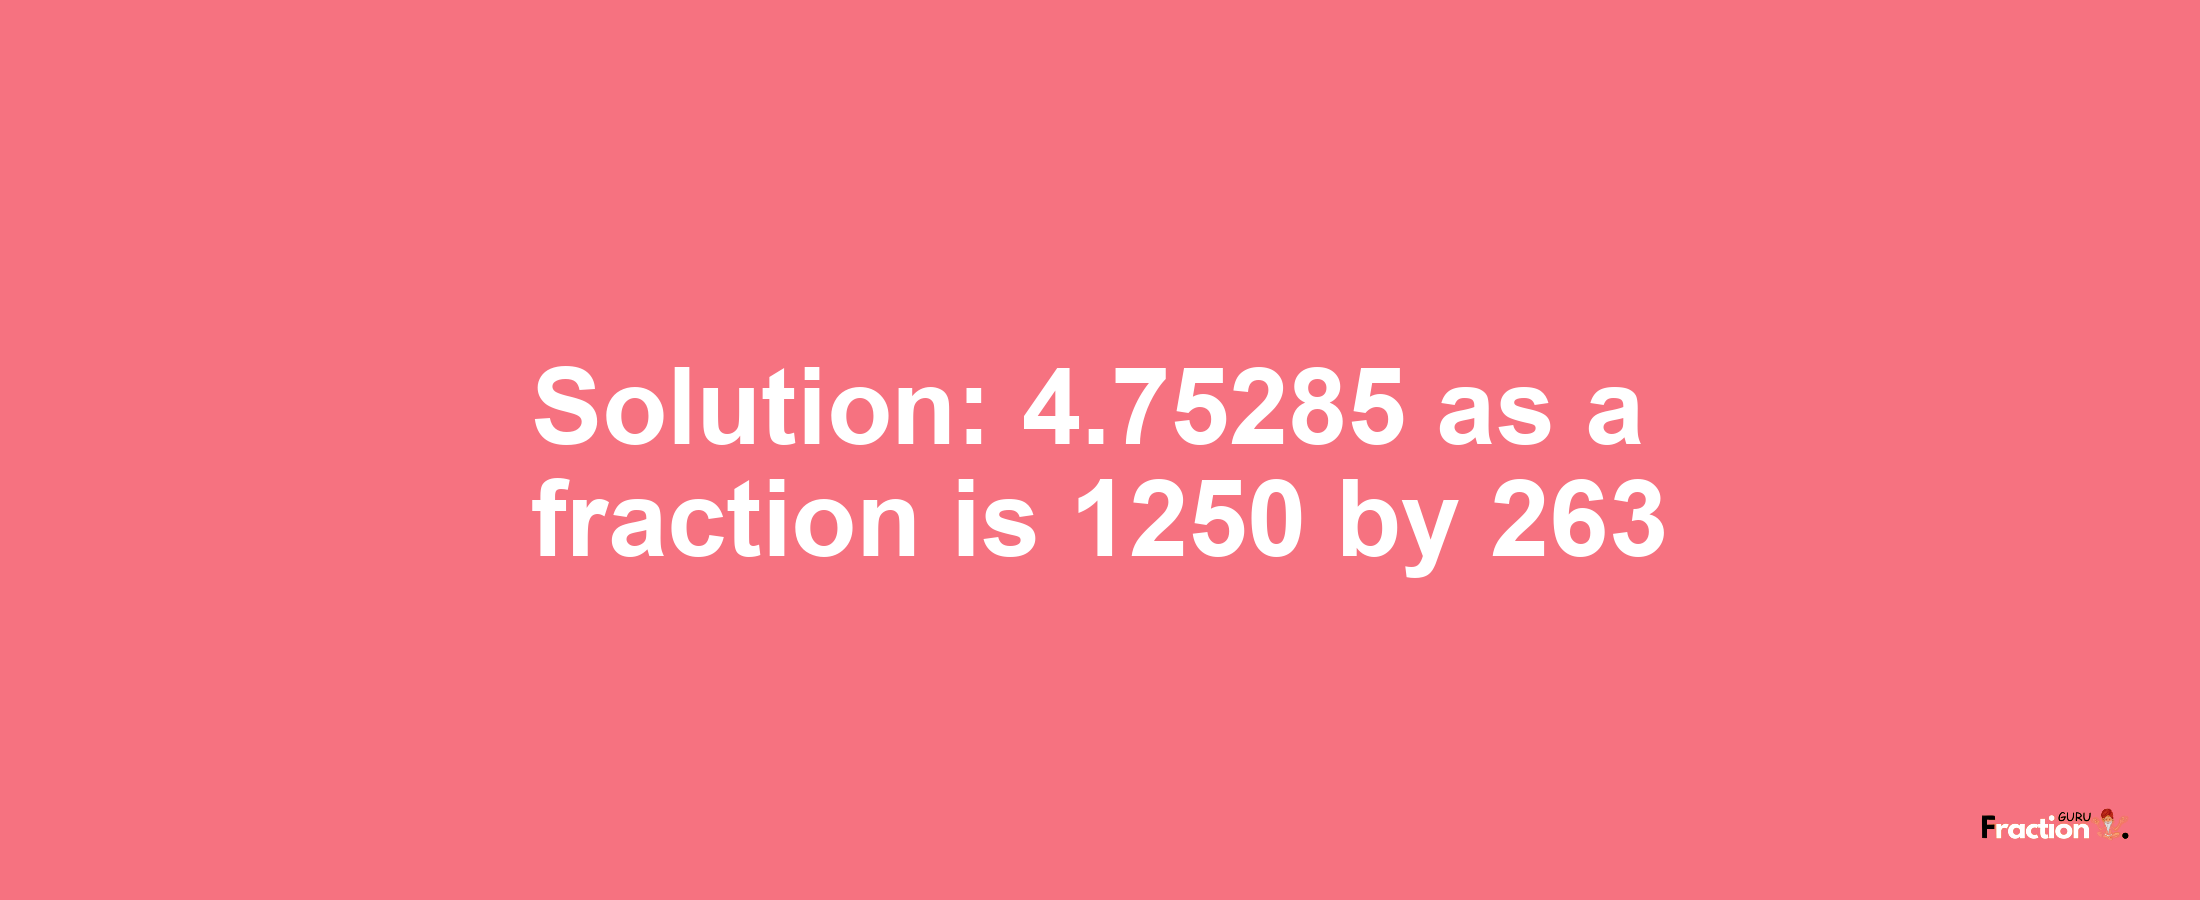 Solution:4.75285 as a fraction is 1250/263